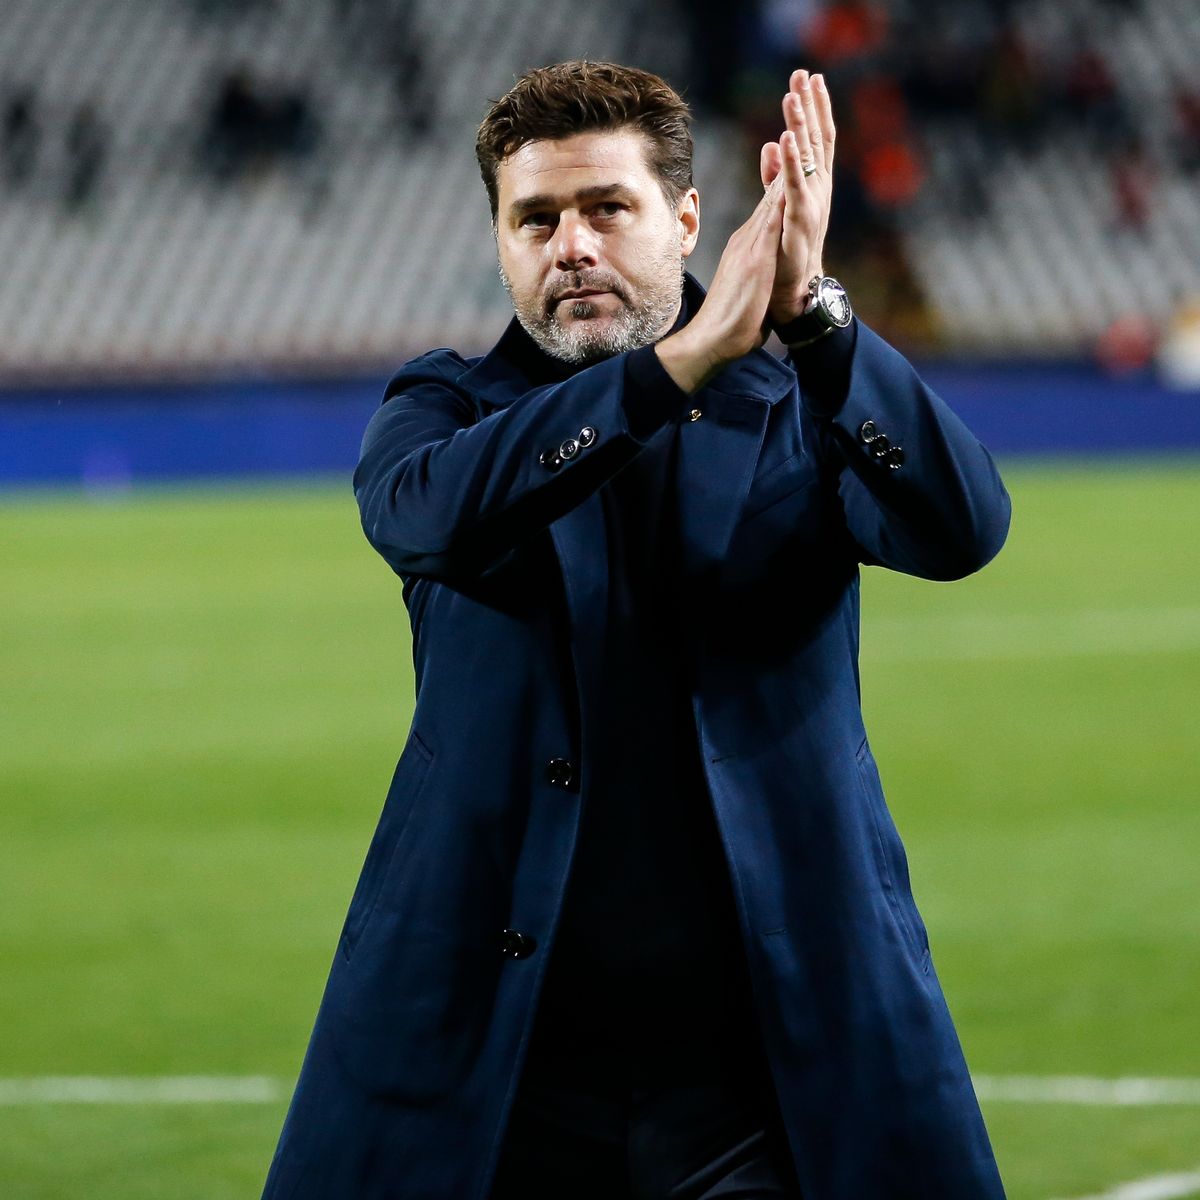 Paris St Germain to appoint ex-Spurs manager Pochettino - L'Equipe